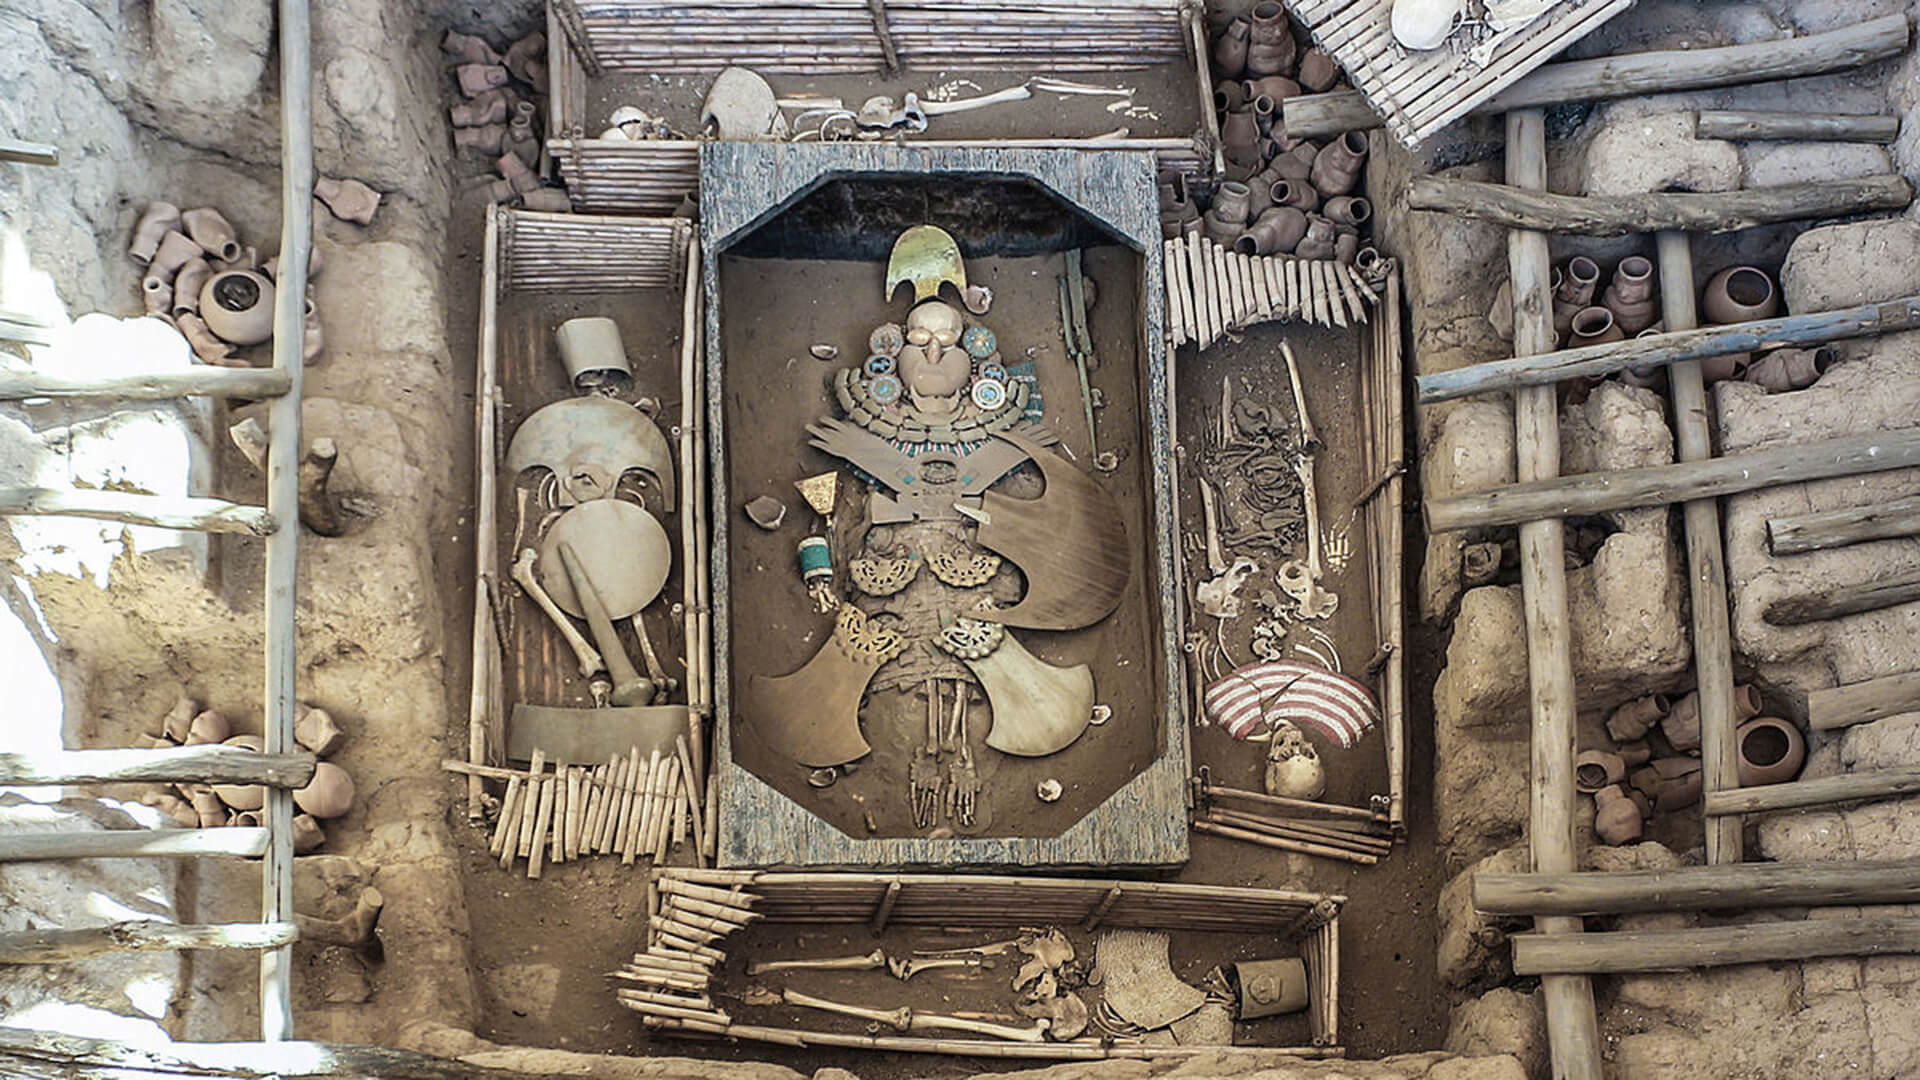 The Lord of Sipan in his tumb surrounded by his entourage and offerings